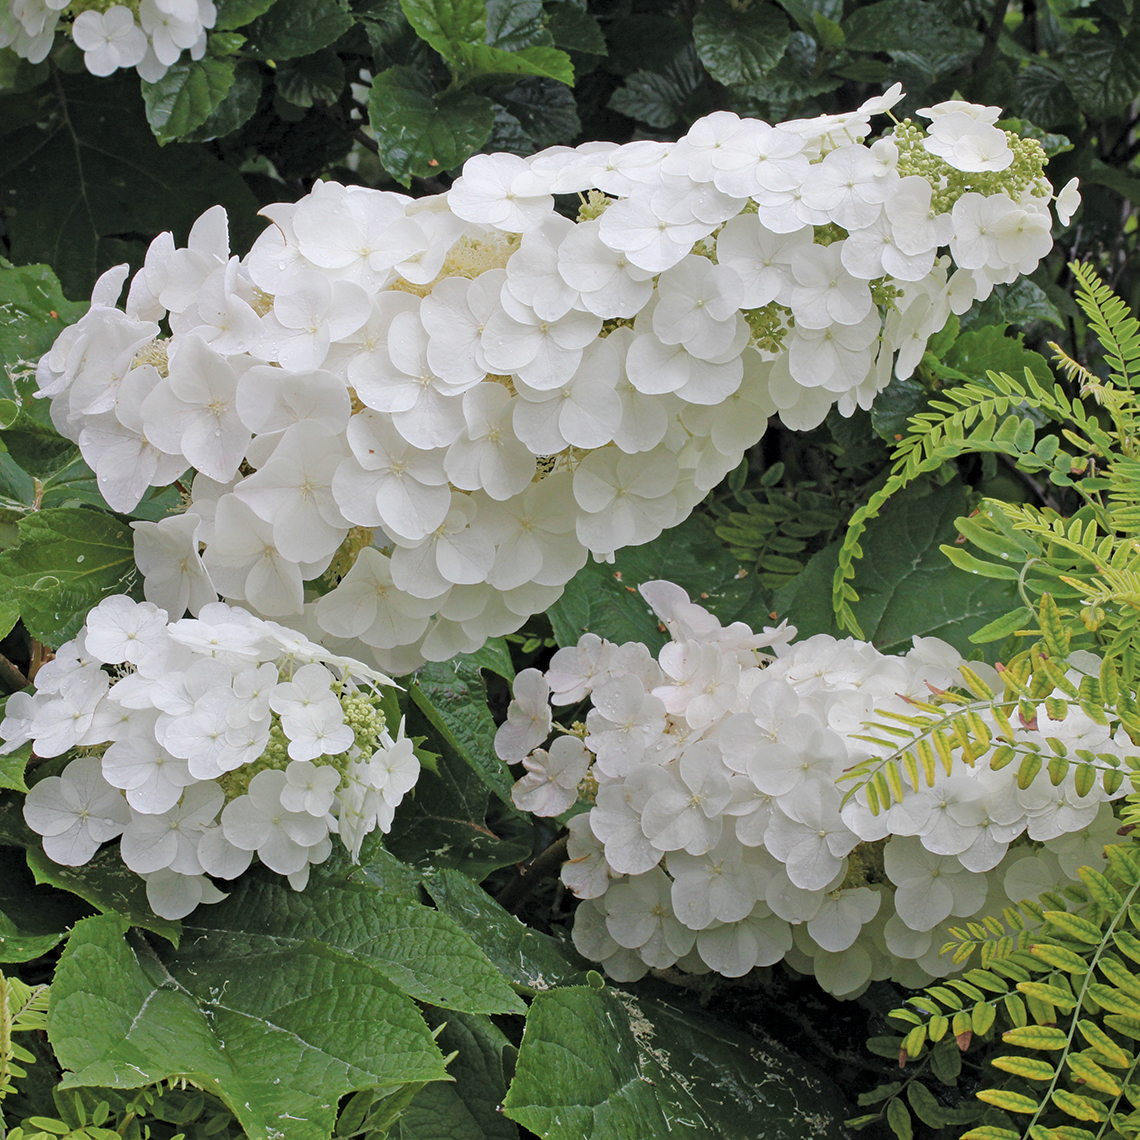 Closeup of the white phase of Gatsby Pink oakleaf hydrangea lacecap flowers